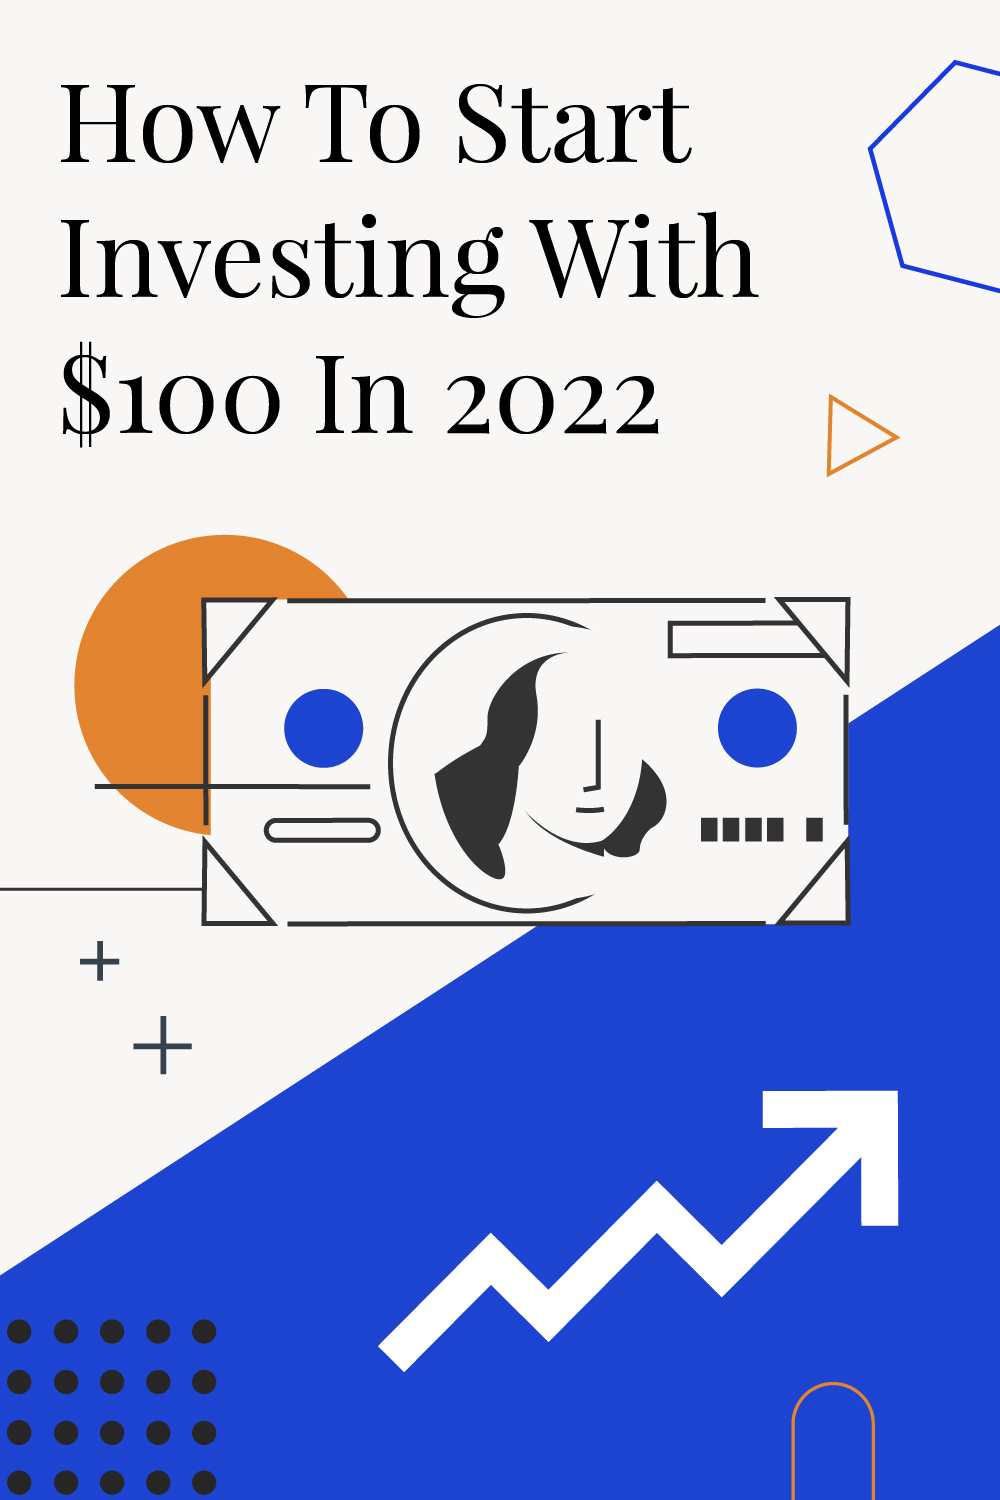 How To Start Investing With $100 Dollars In 2022